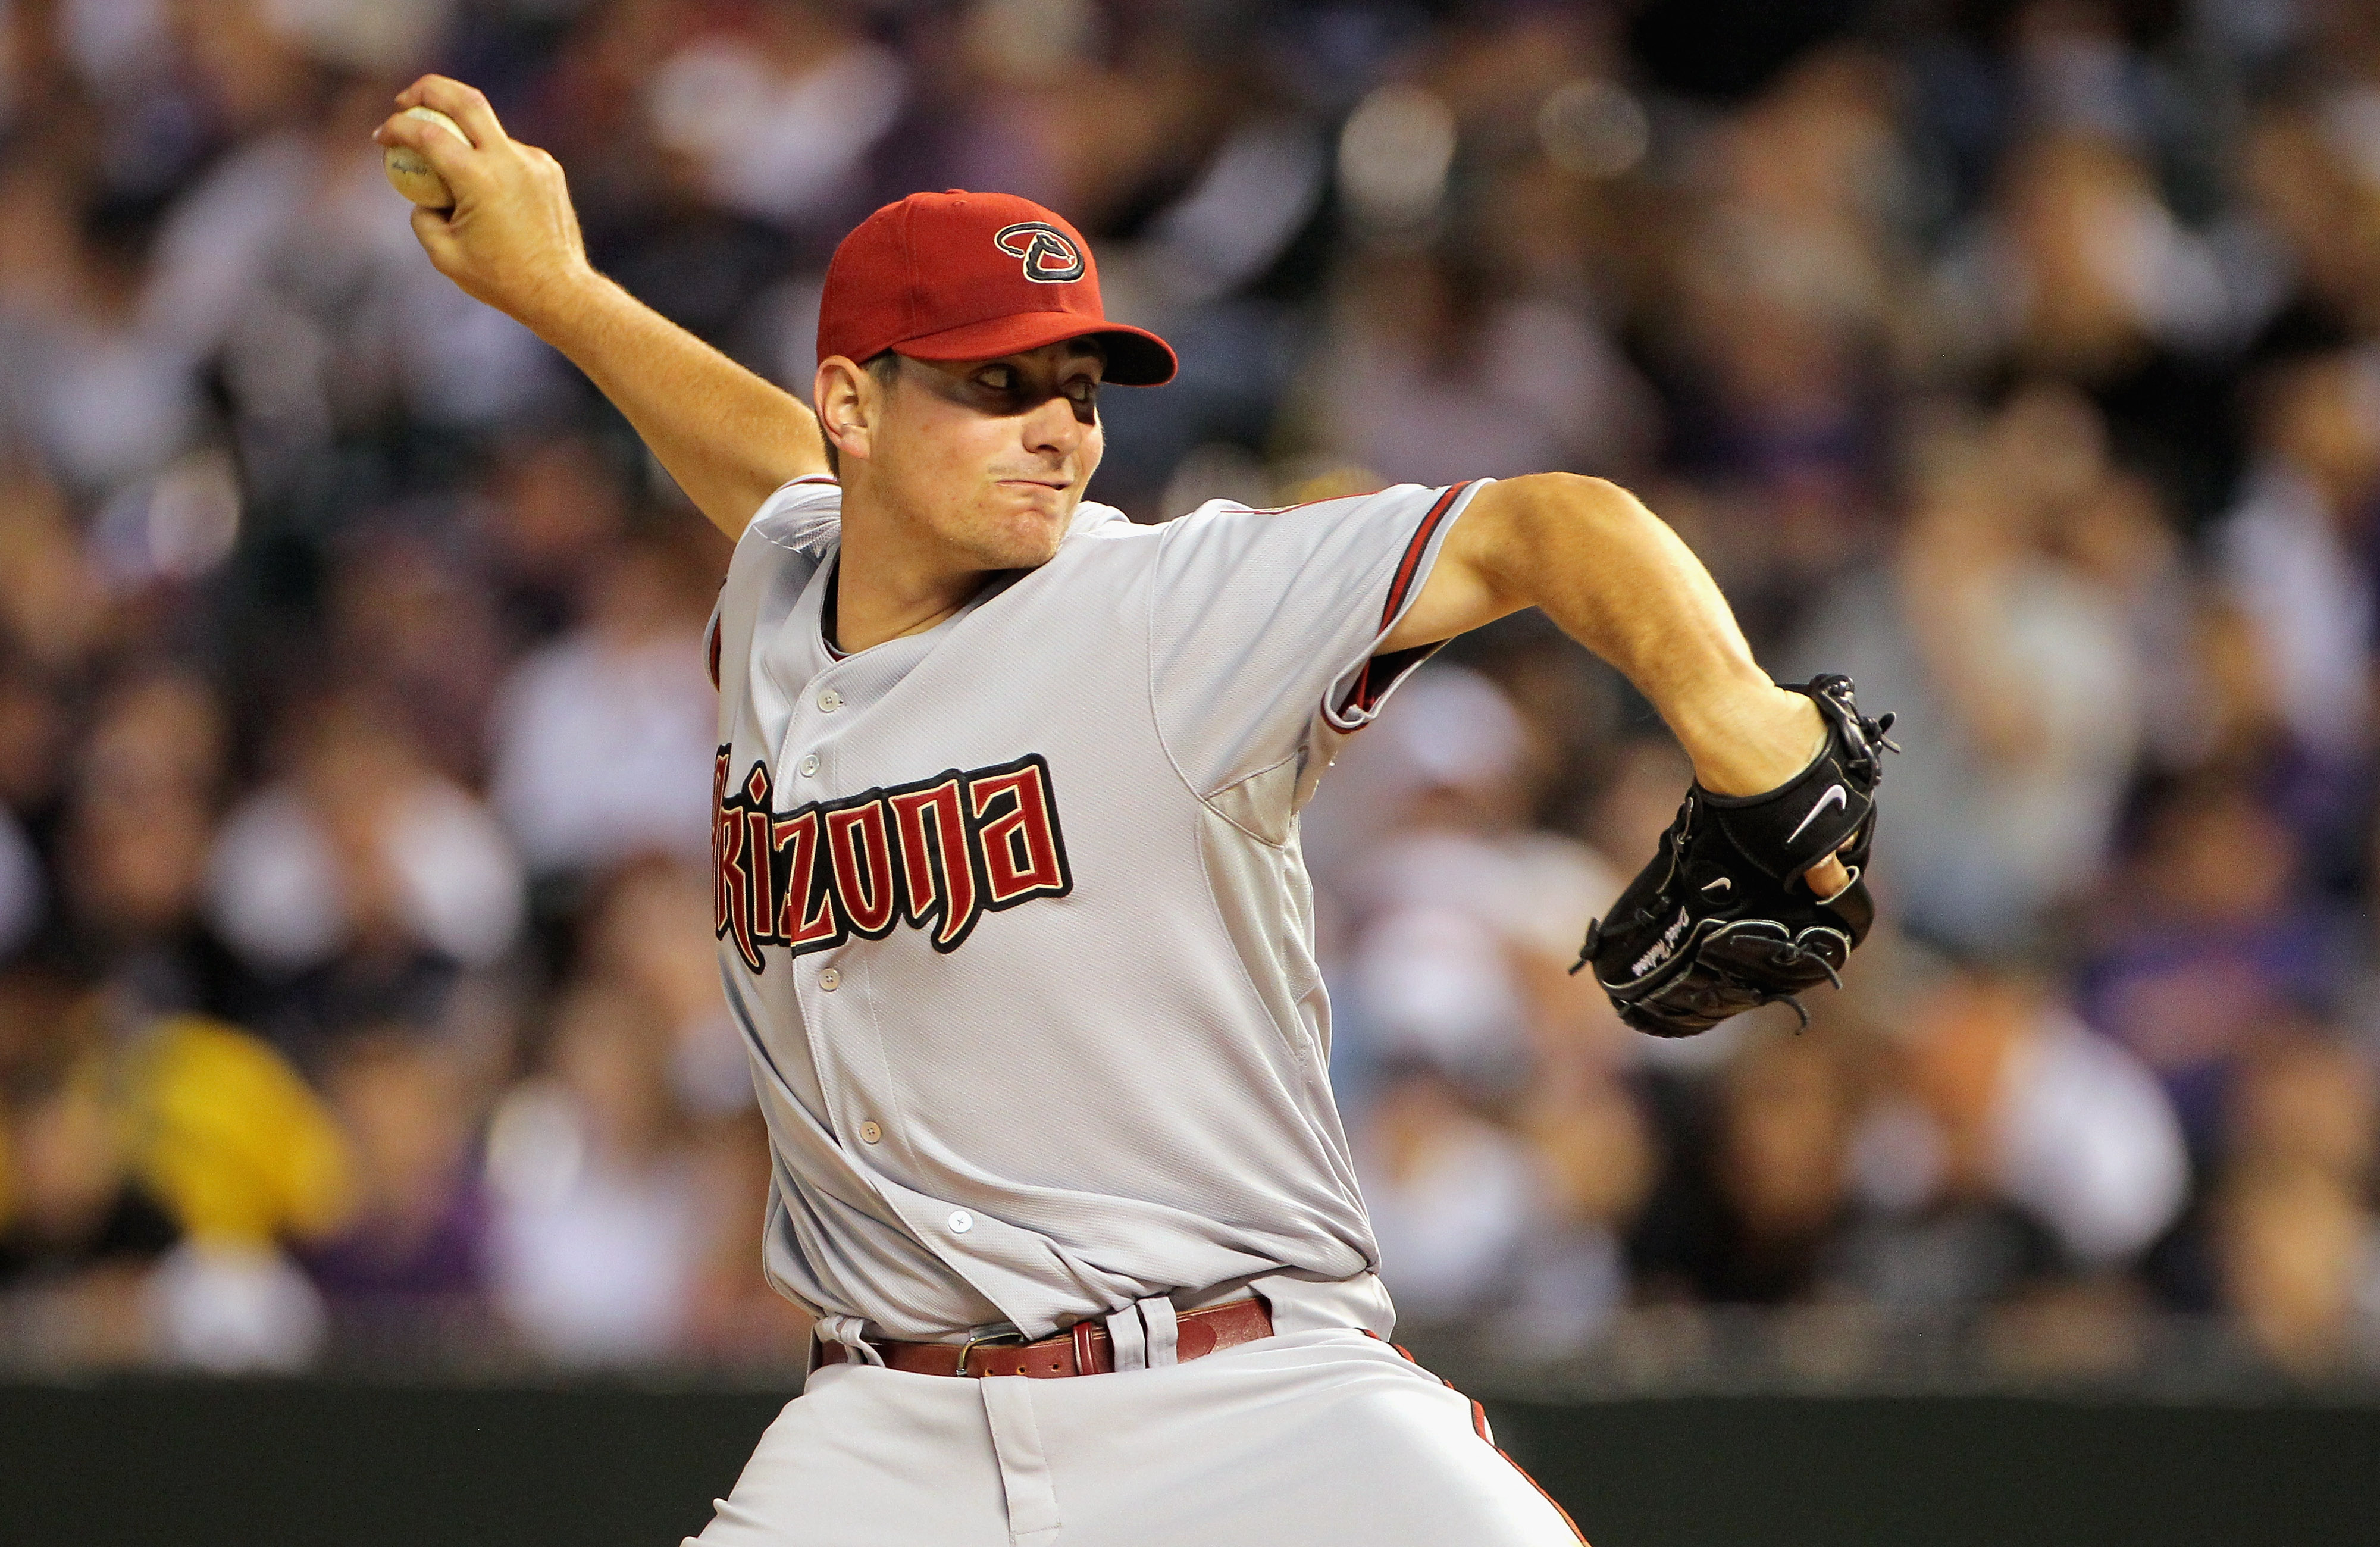 DENVER, CO - APRIL 02:  Starting pitcher Daniel Hudson #41 of the Arizona Diamondbacks delivers against the Colorado Rockies at Coors Field on April 2, 2011 in Denver, Colorado.  (Photo by Doug Pensinger/Getty Images)